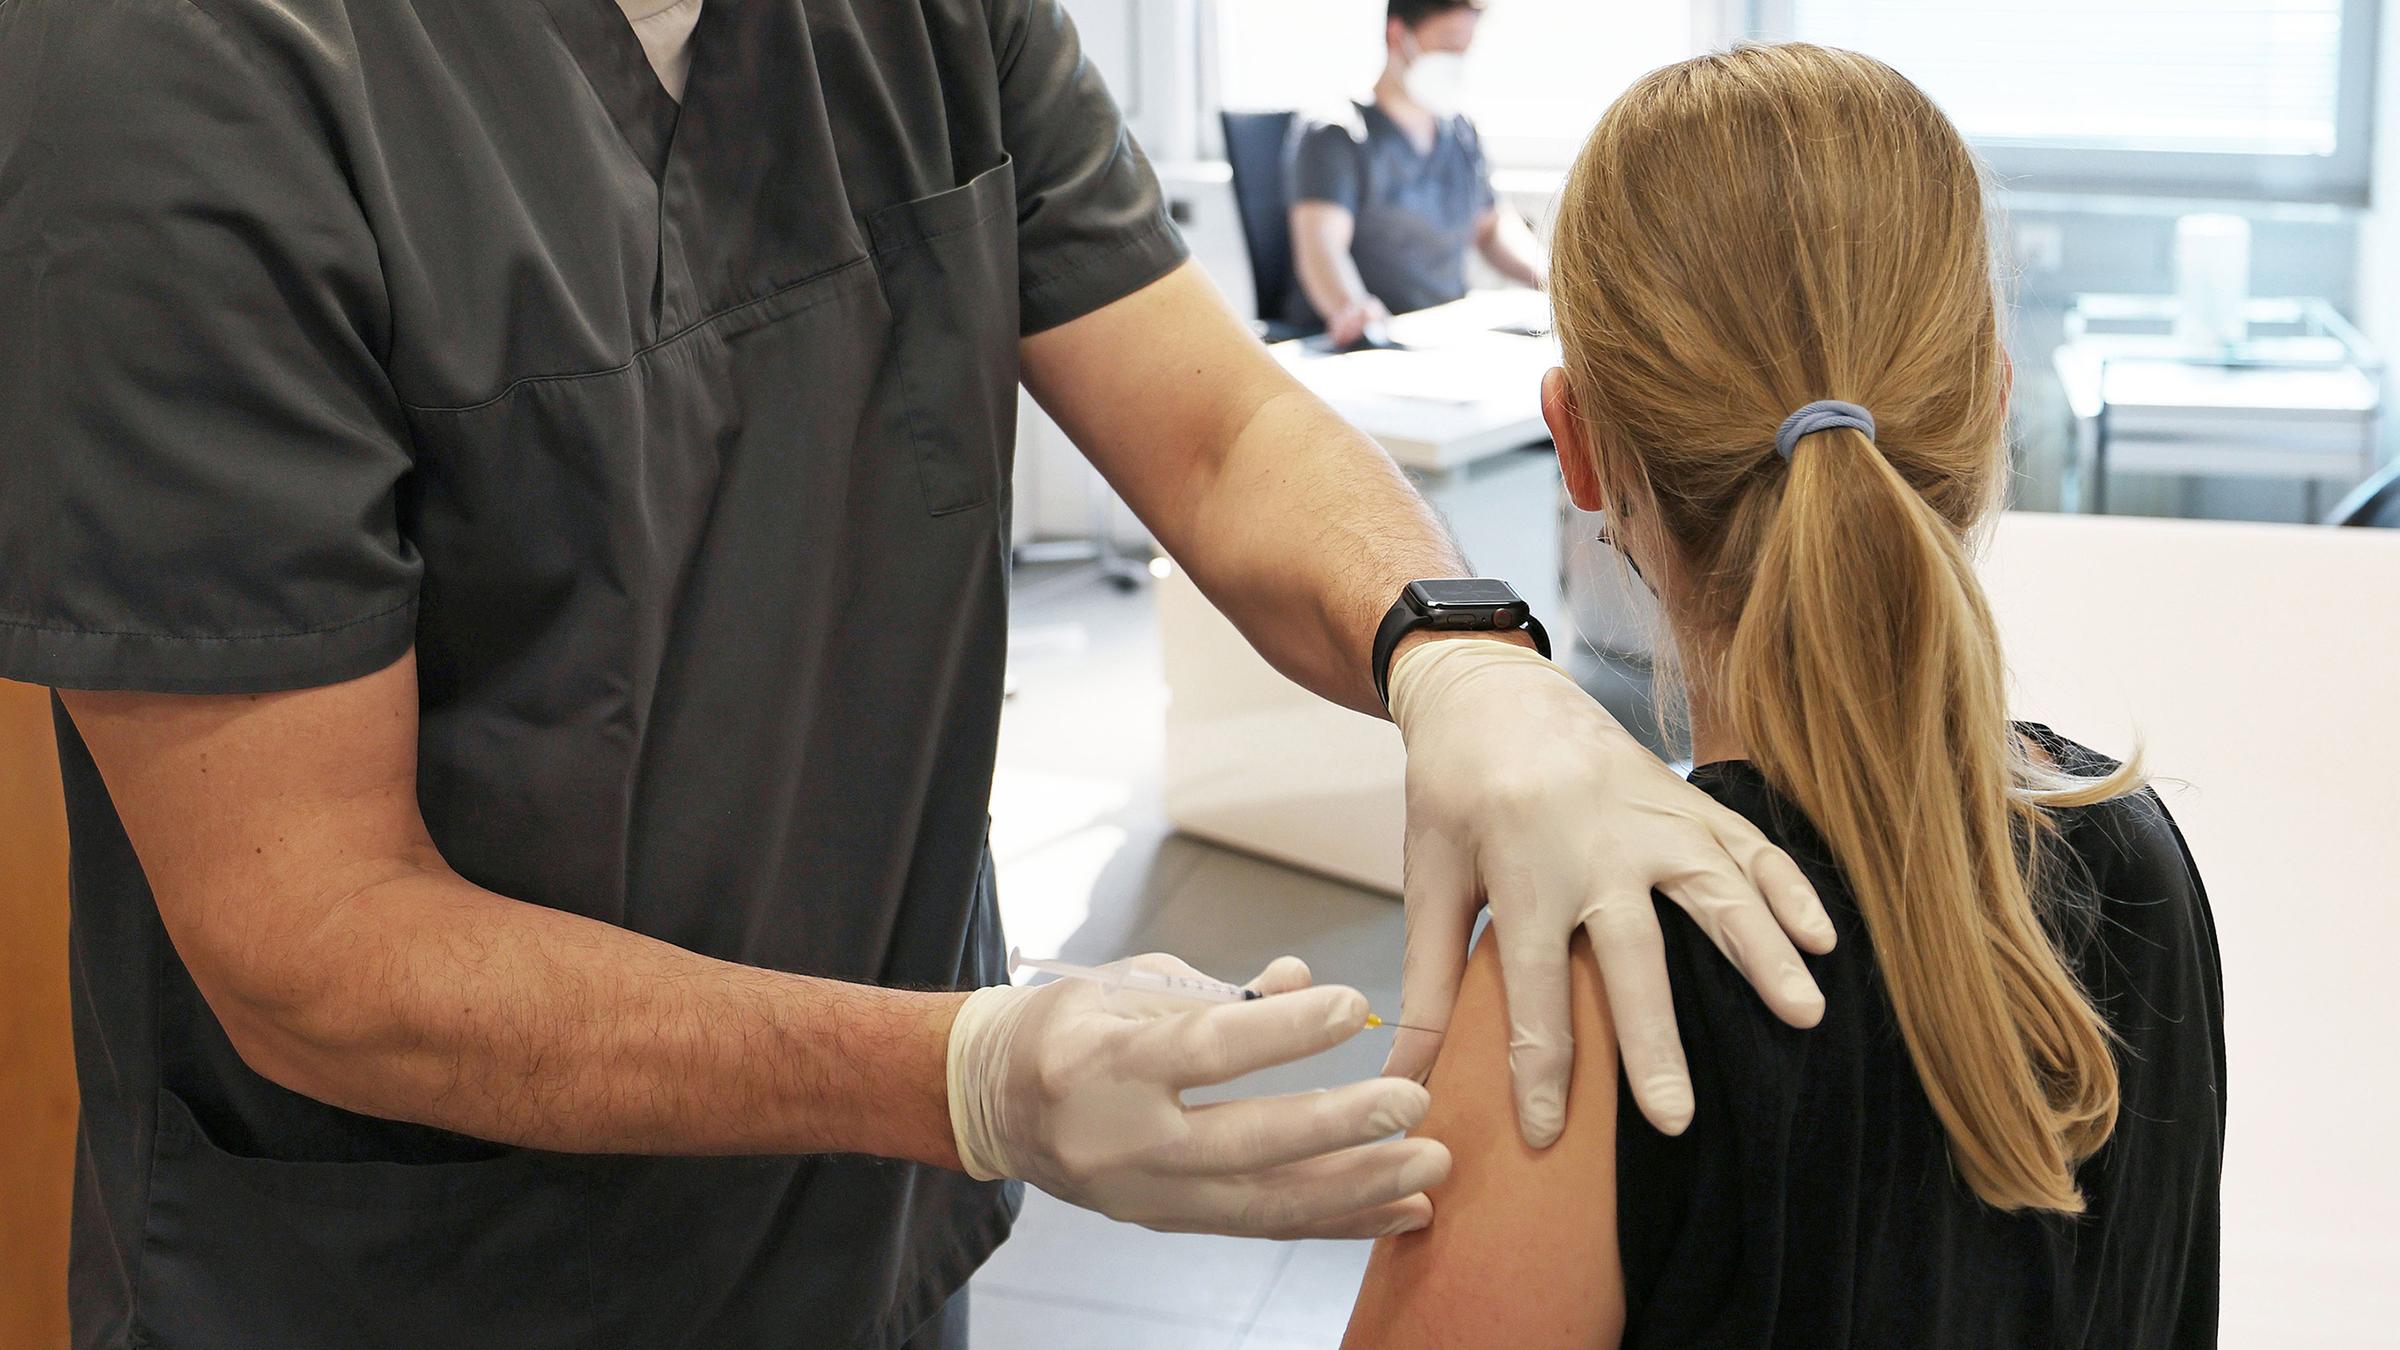 A twelve-year-old girl is vaccinated by the family doctor